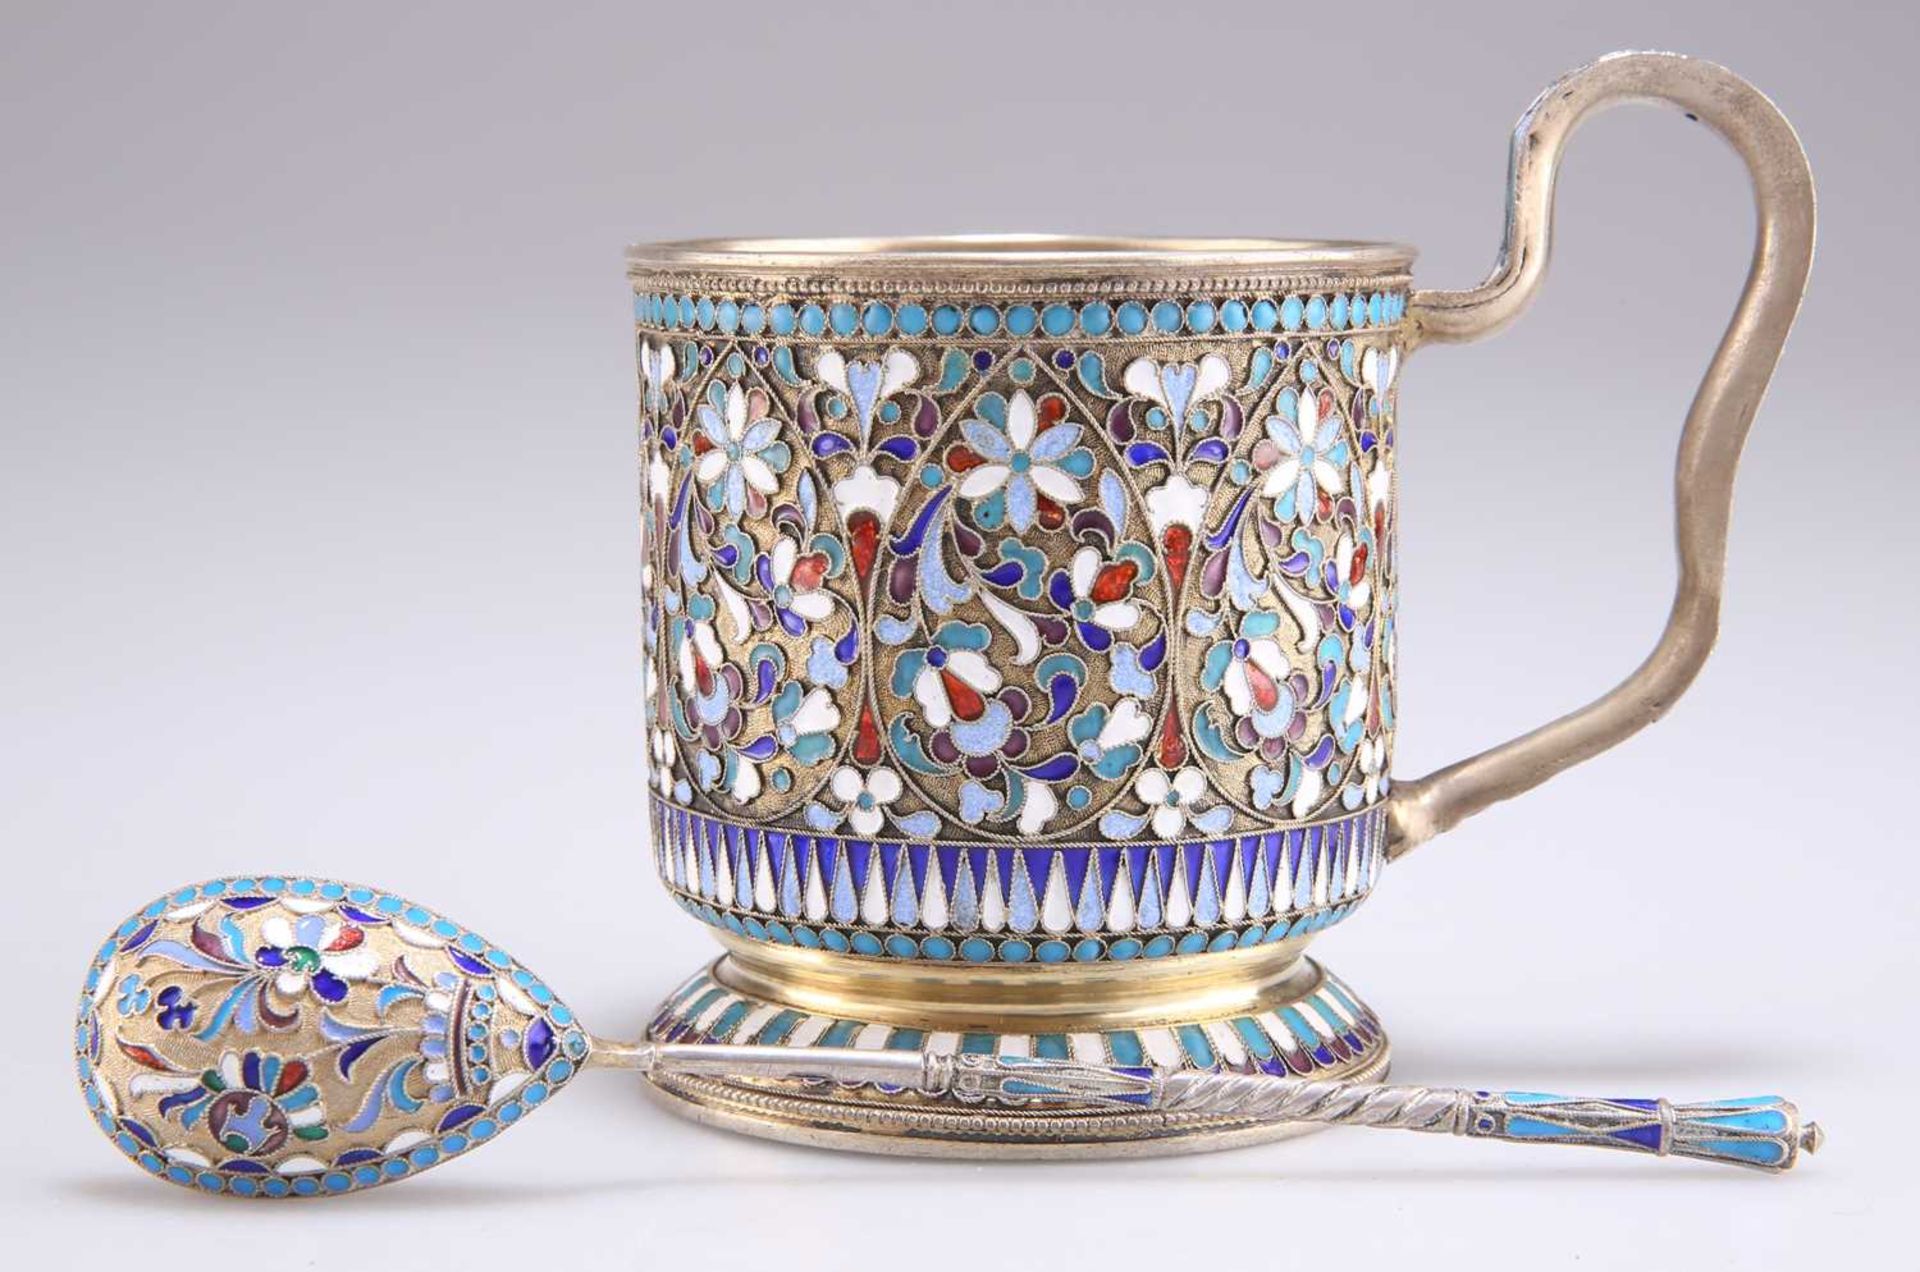 A RUSSIAN SILVER-GILT AND ENAMEL MUG AND SPOON